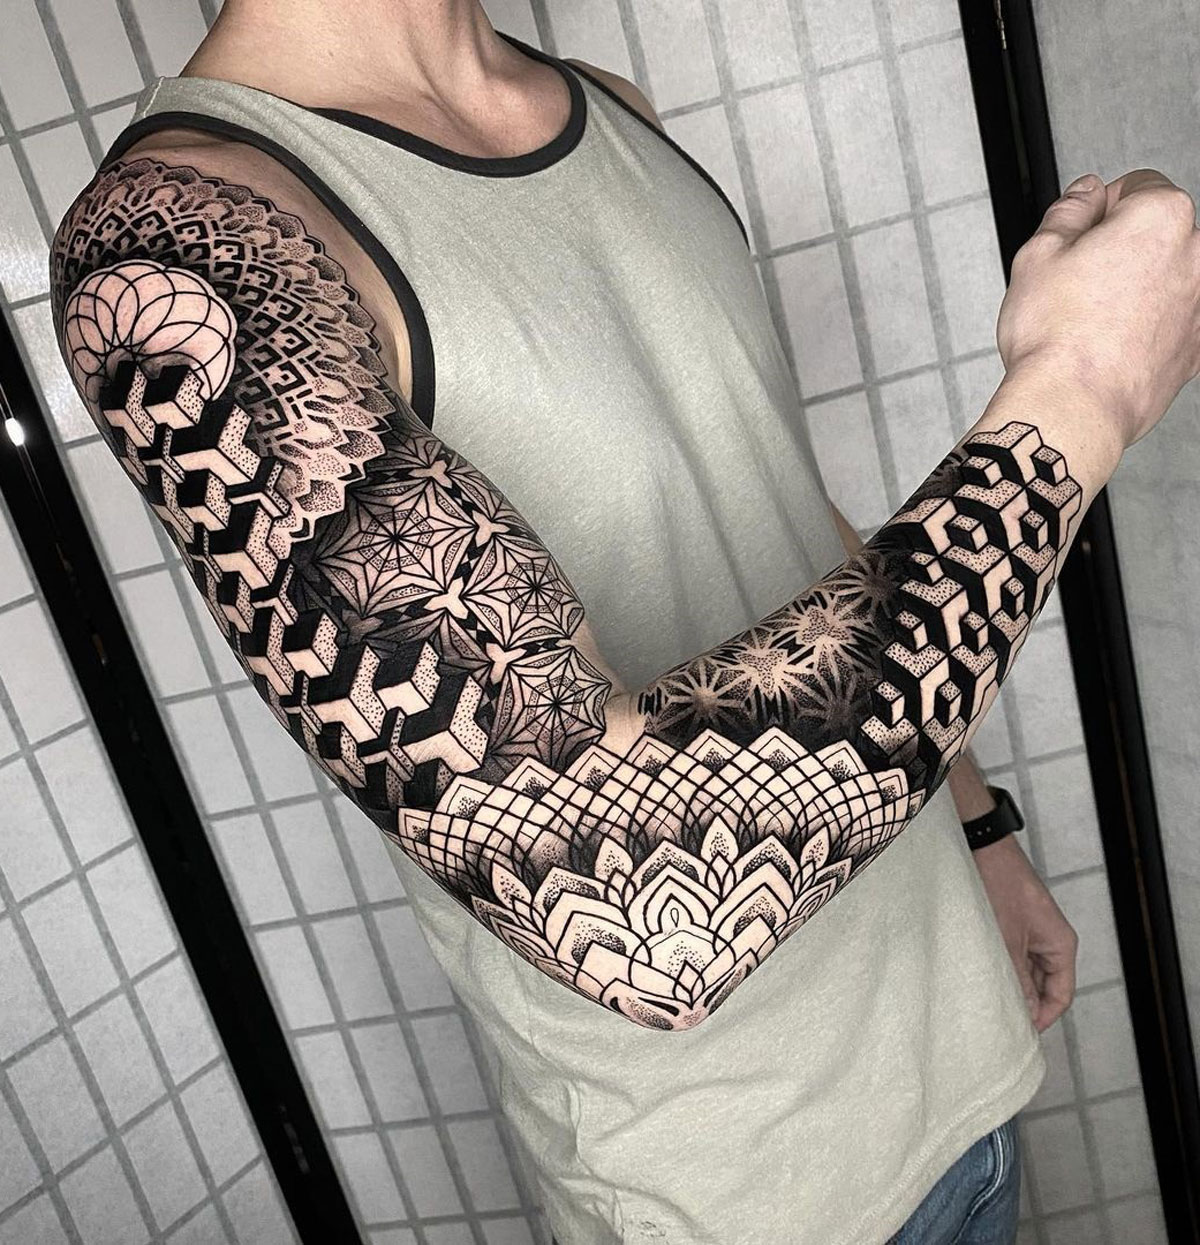 96 Geometric Tattoo Designs That Are All About Shapes, Forms, And  Creativity | Bored Panda